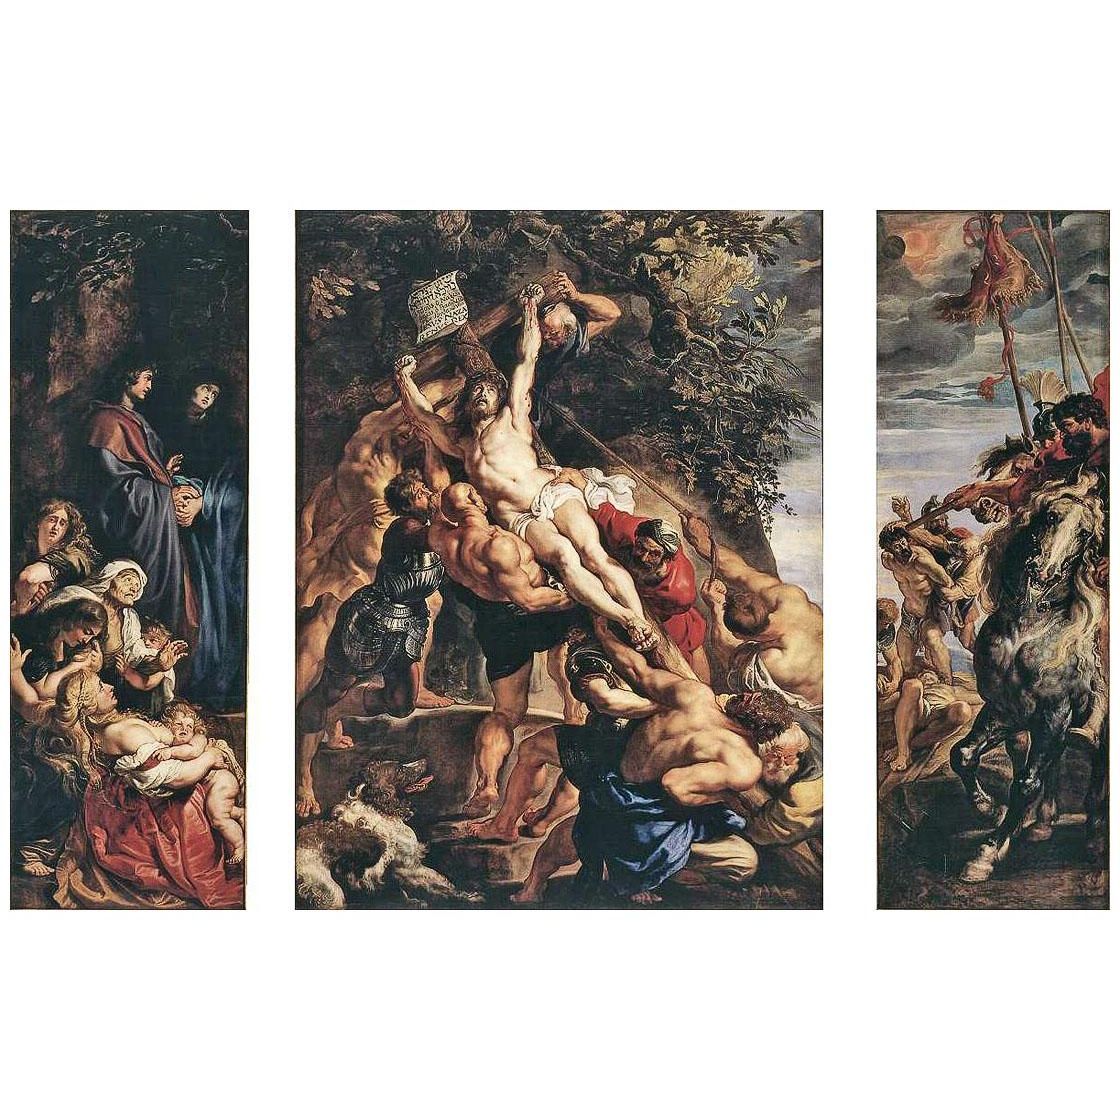 Peter Paul Rubens. Raising of the Cross. 1610. Cathedral of Our Lady Antwerp